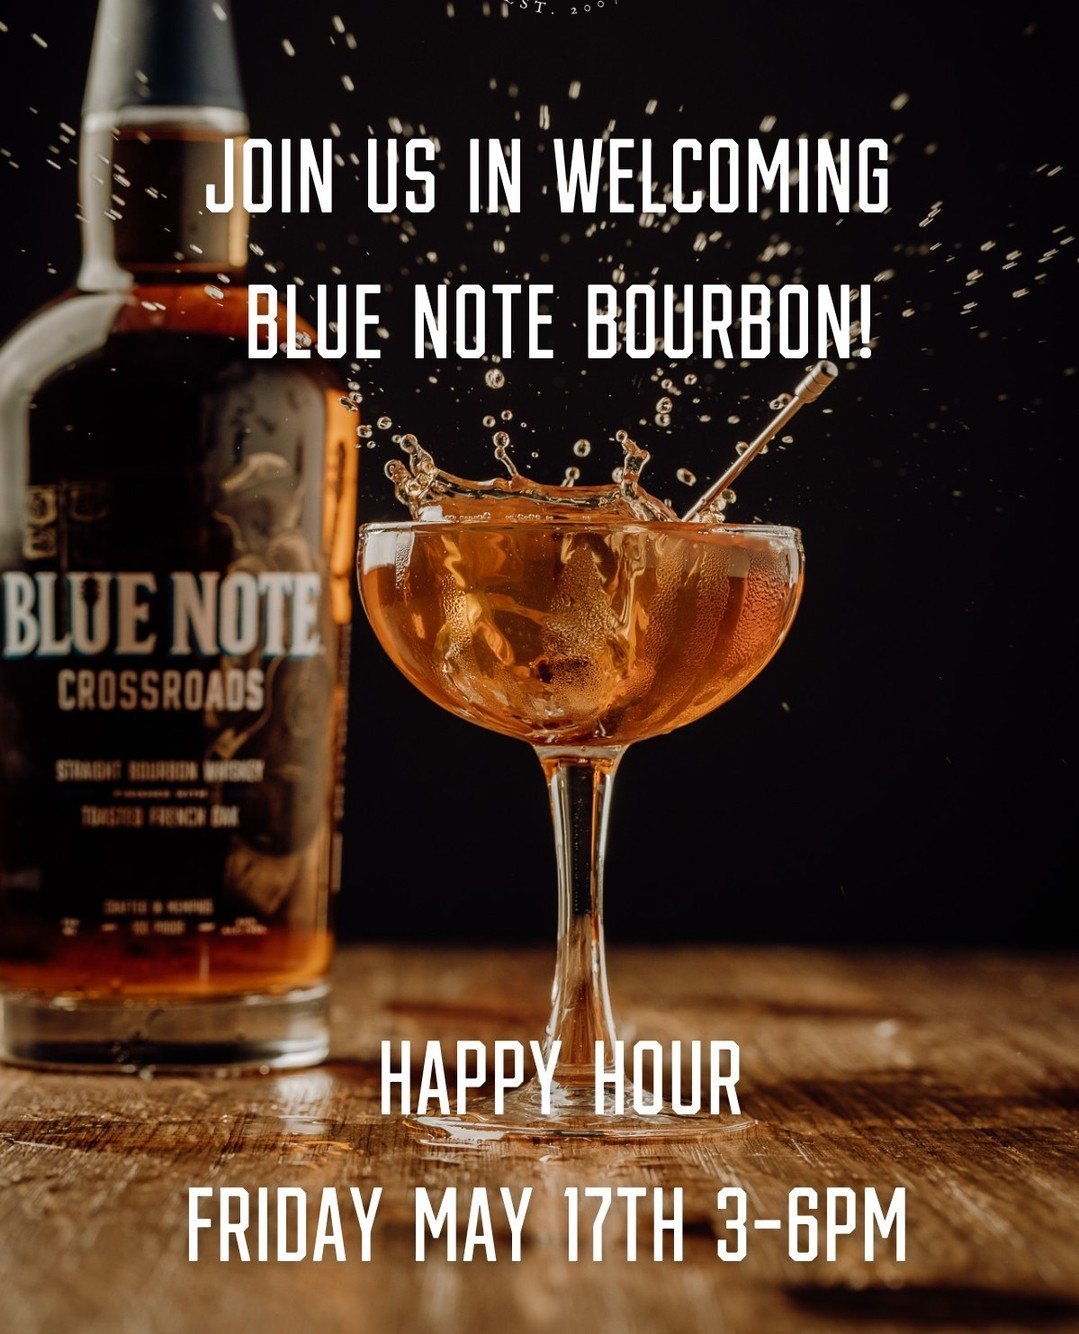 Get ready to jazz up your Friday at our Blue Note Bourbon Happy Hour tomorrow. From 3pm to 6pm, swing by and sample our newest pours: Blue Note Juke Joint and Blue Note Crossroads. Let the sweet corn and allspice notes of Juke Joint whisk you away, o